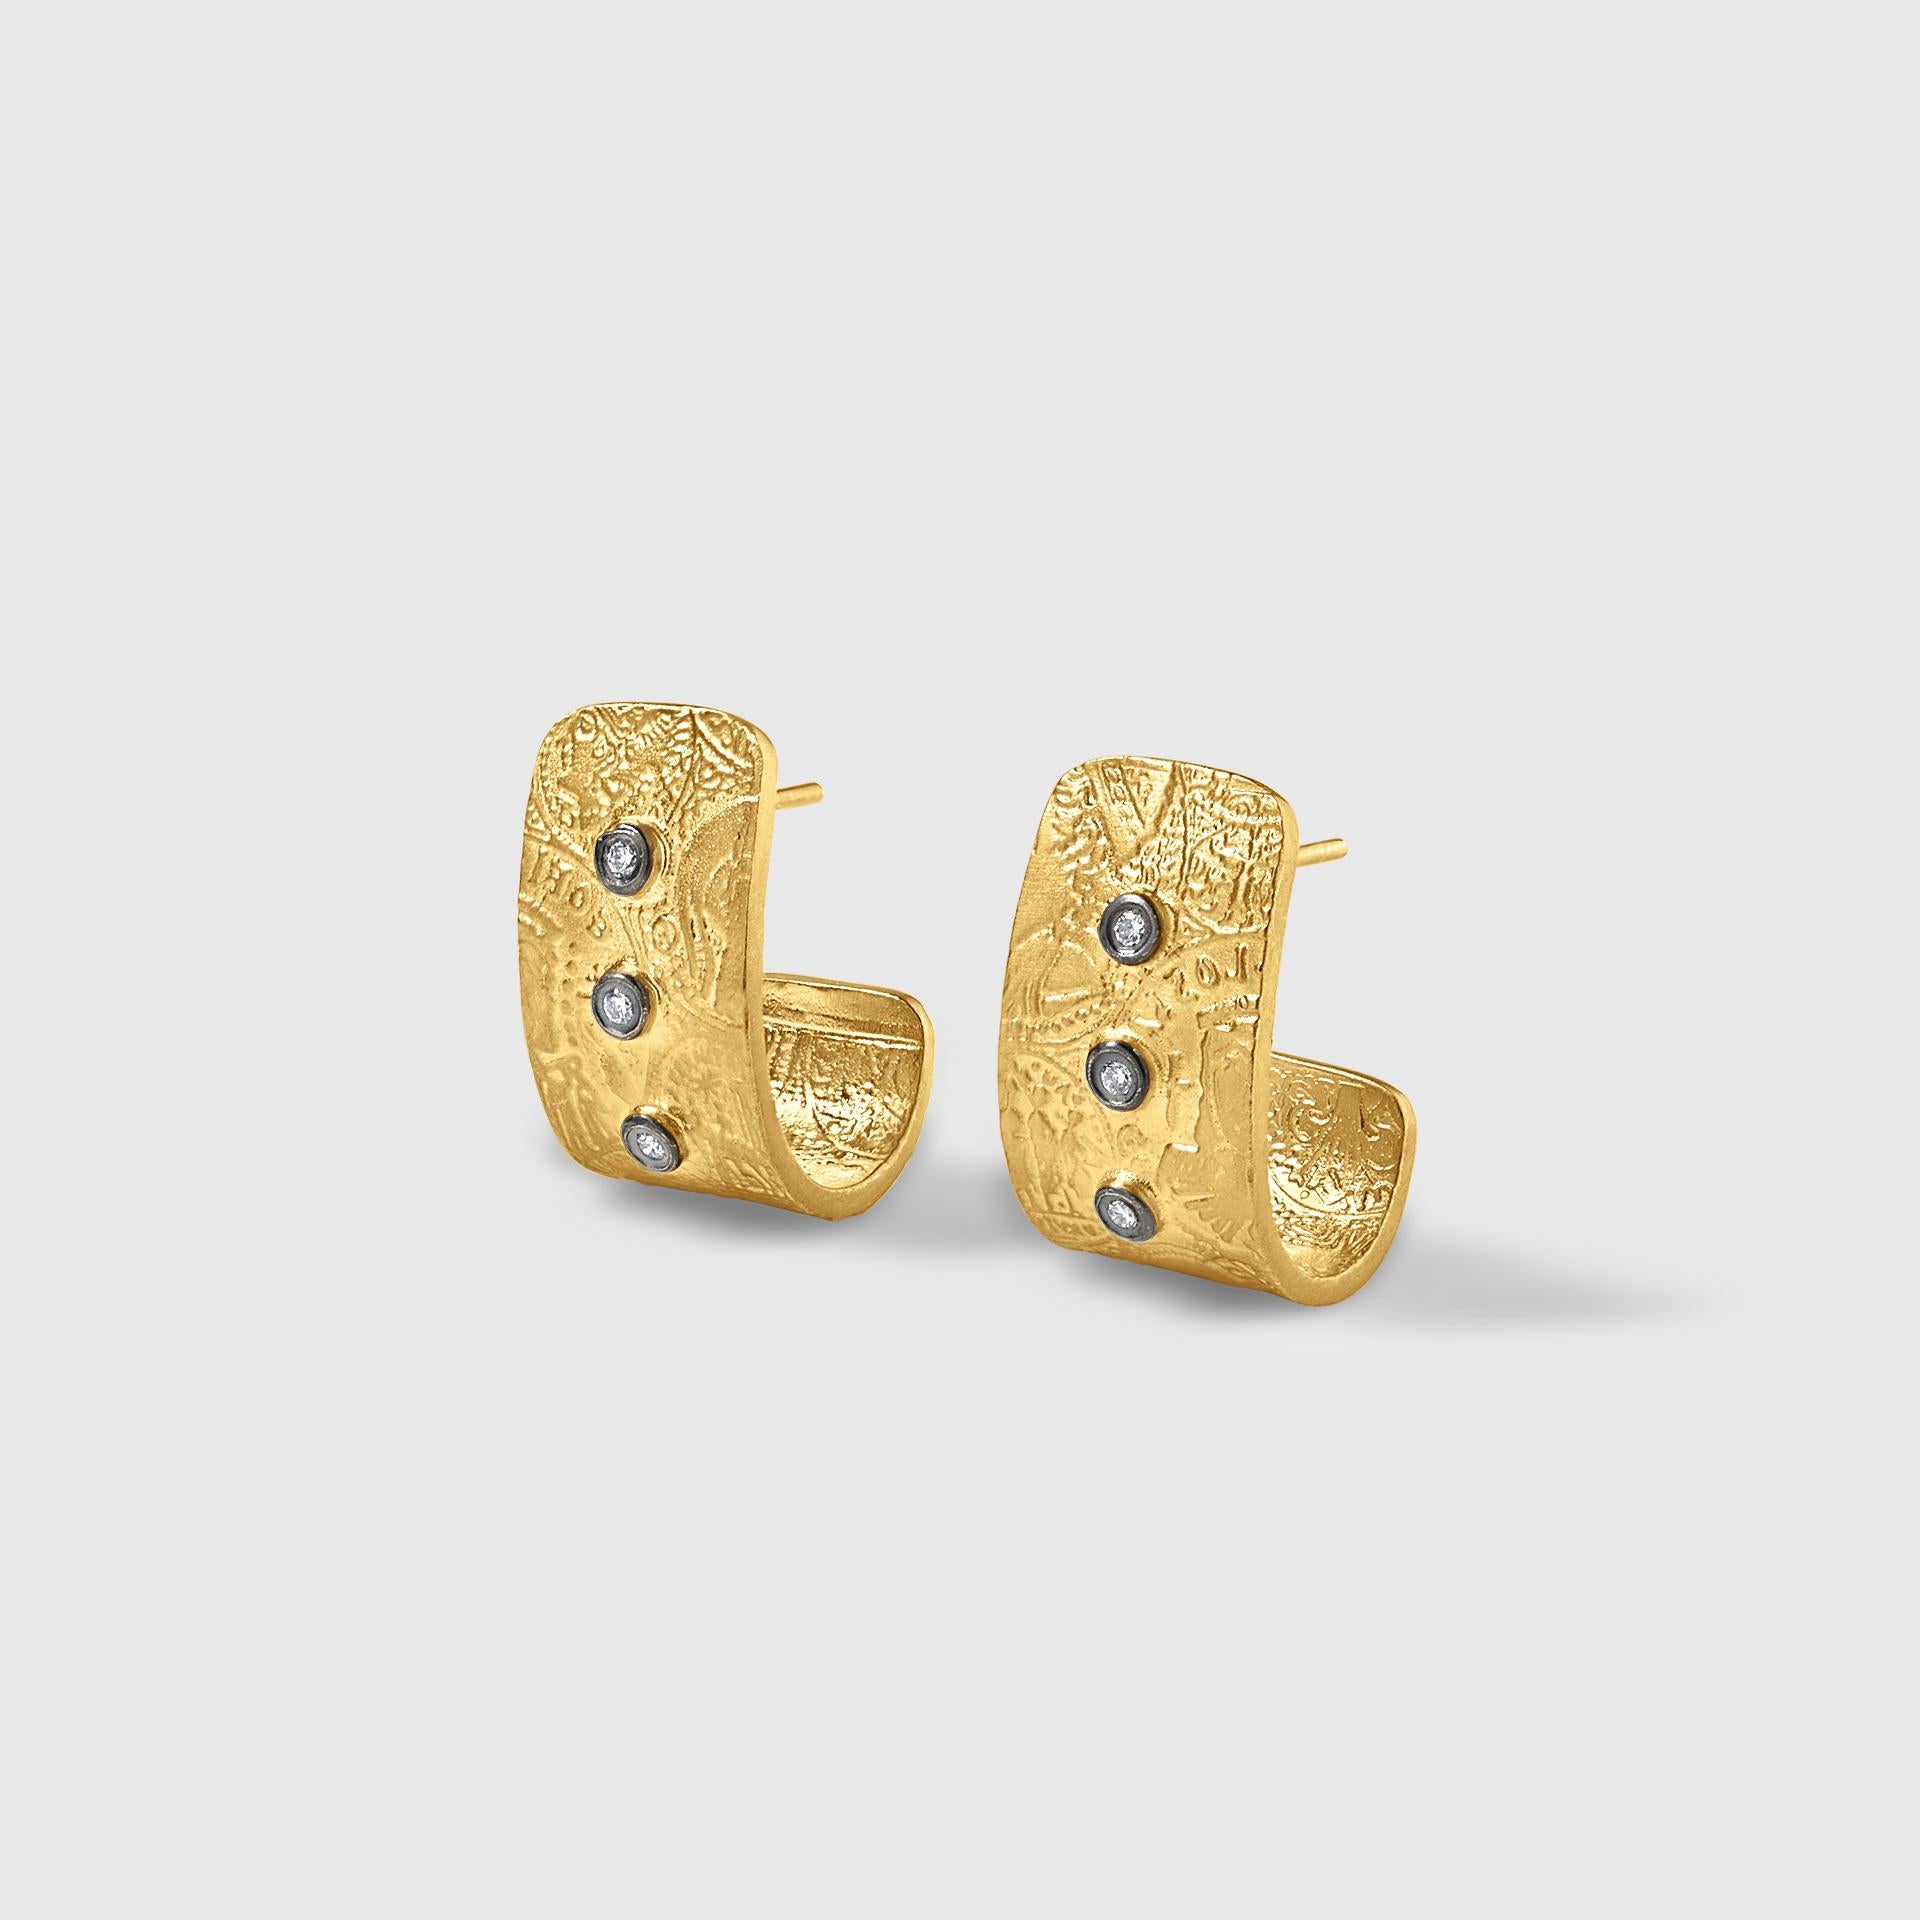 0.08 Carat Diamonds, Byzantine Coin Surface Post Earrings with Diamonds by Kurtulan Jewellery of Istanbul, Turkey 
Perfect for day or night. These earrings are made to order.  Delivery time takes approximately 4-6 weeks.

About Kurtulan:
A jewellery